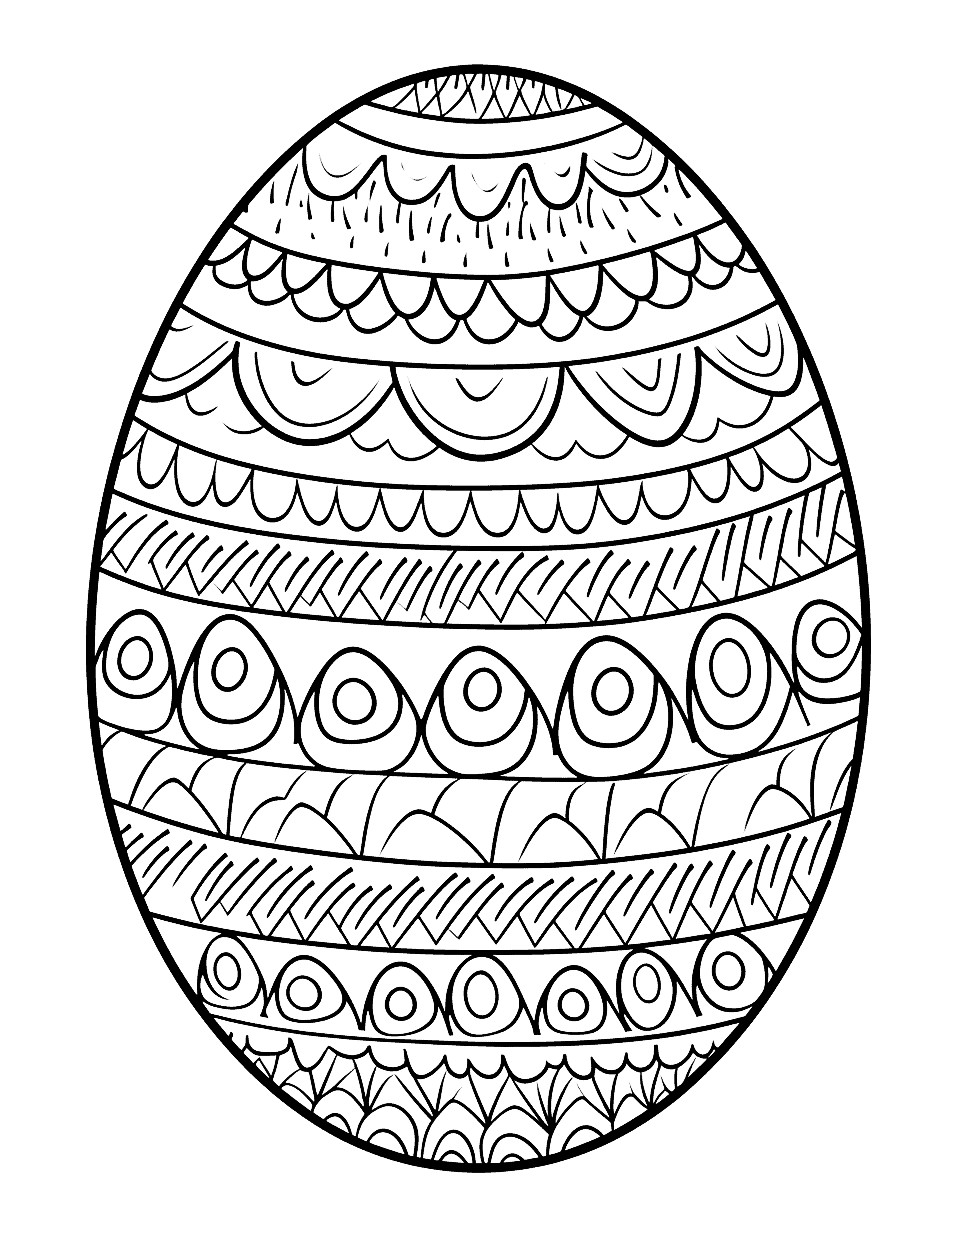 Easter Egg Mandala Coloring Page - An intricate mandala design formed by Easter eggs providing a meditative coloring experience.